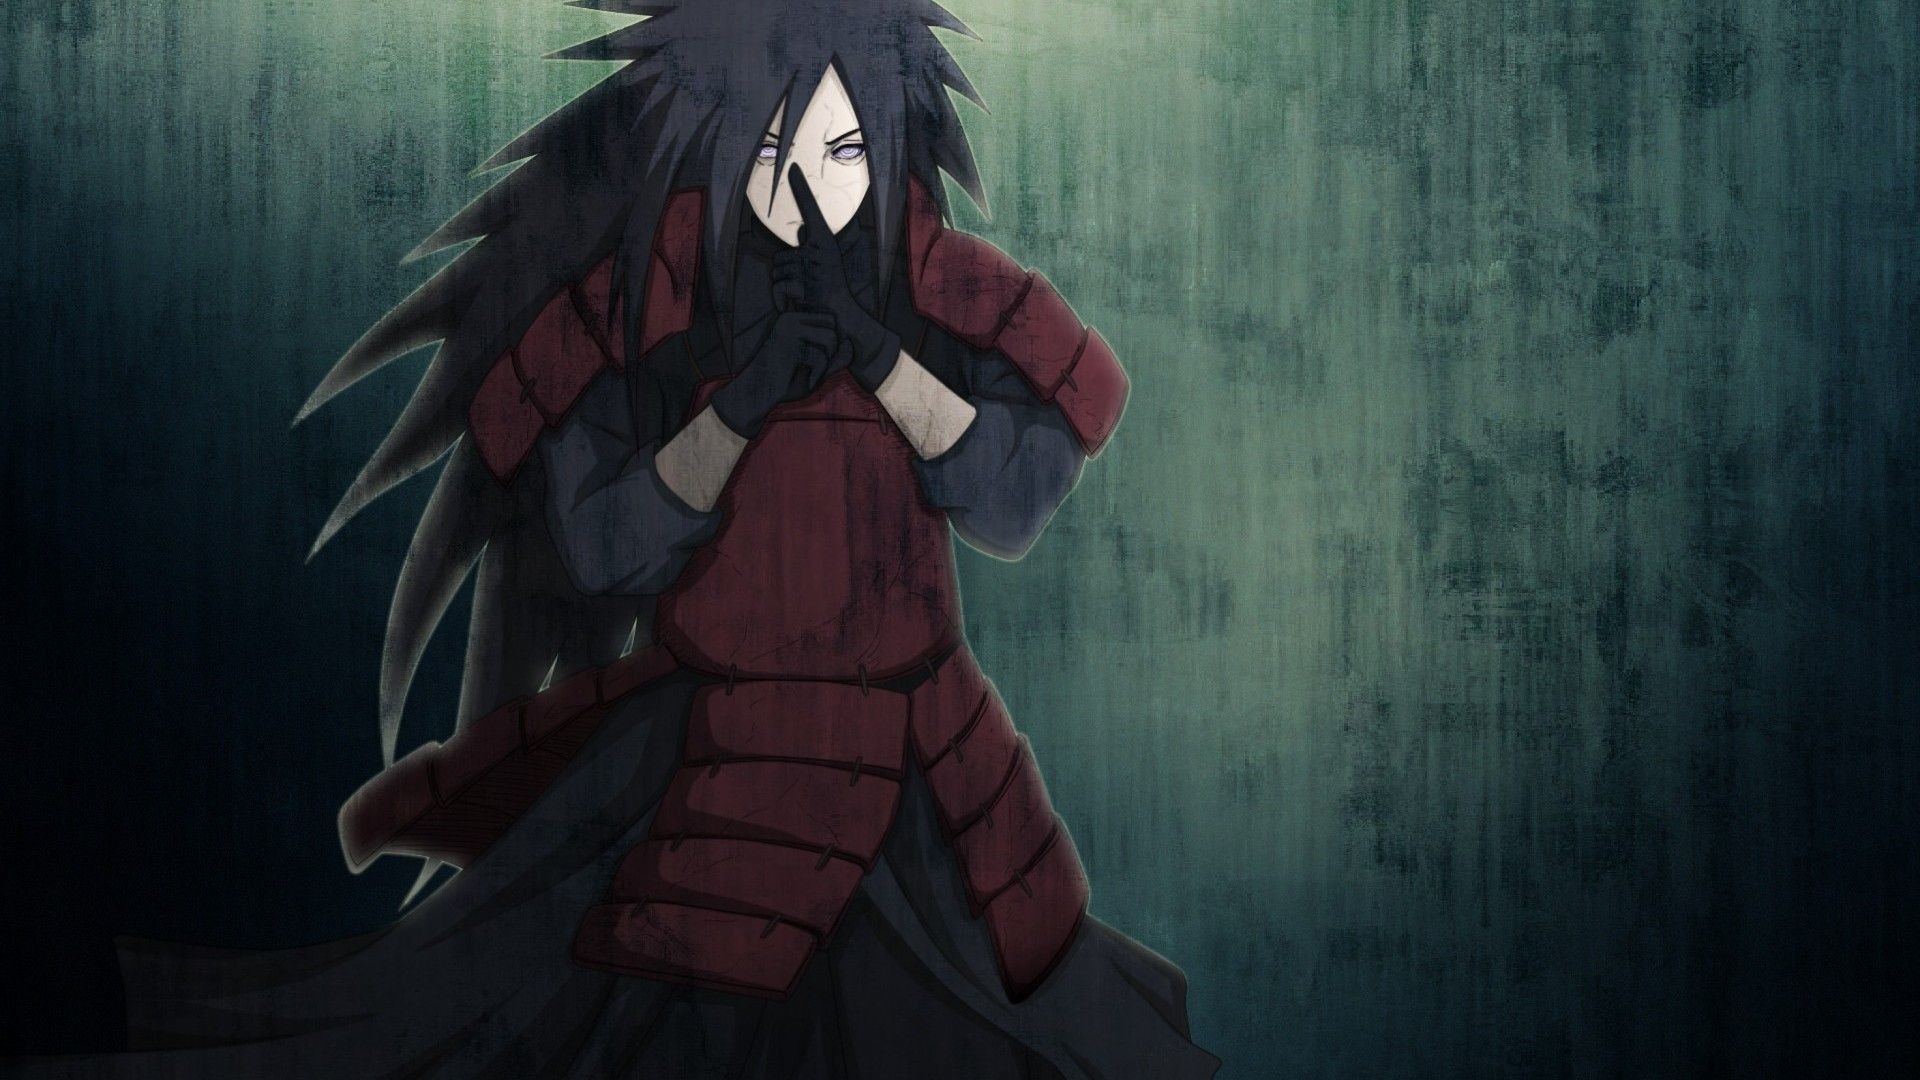 1920x1080 159 Obito Uchiha HD Wallpapers | Backgrounds - Wallpaper Abyss ...